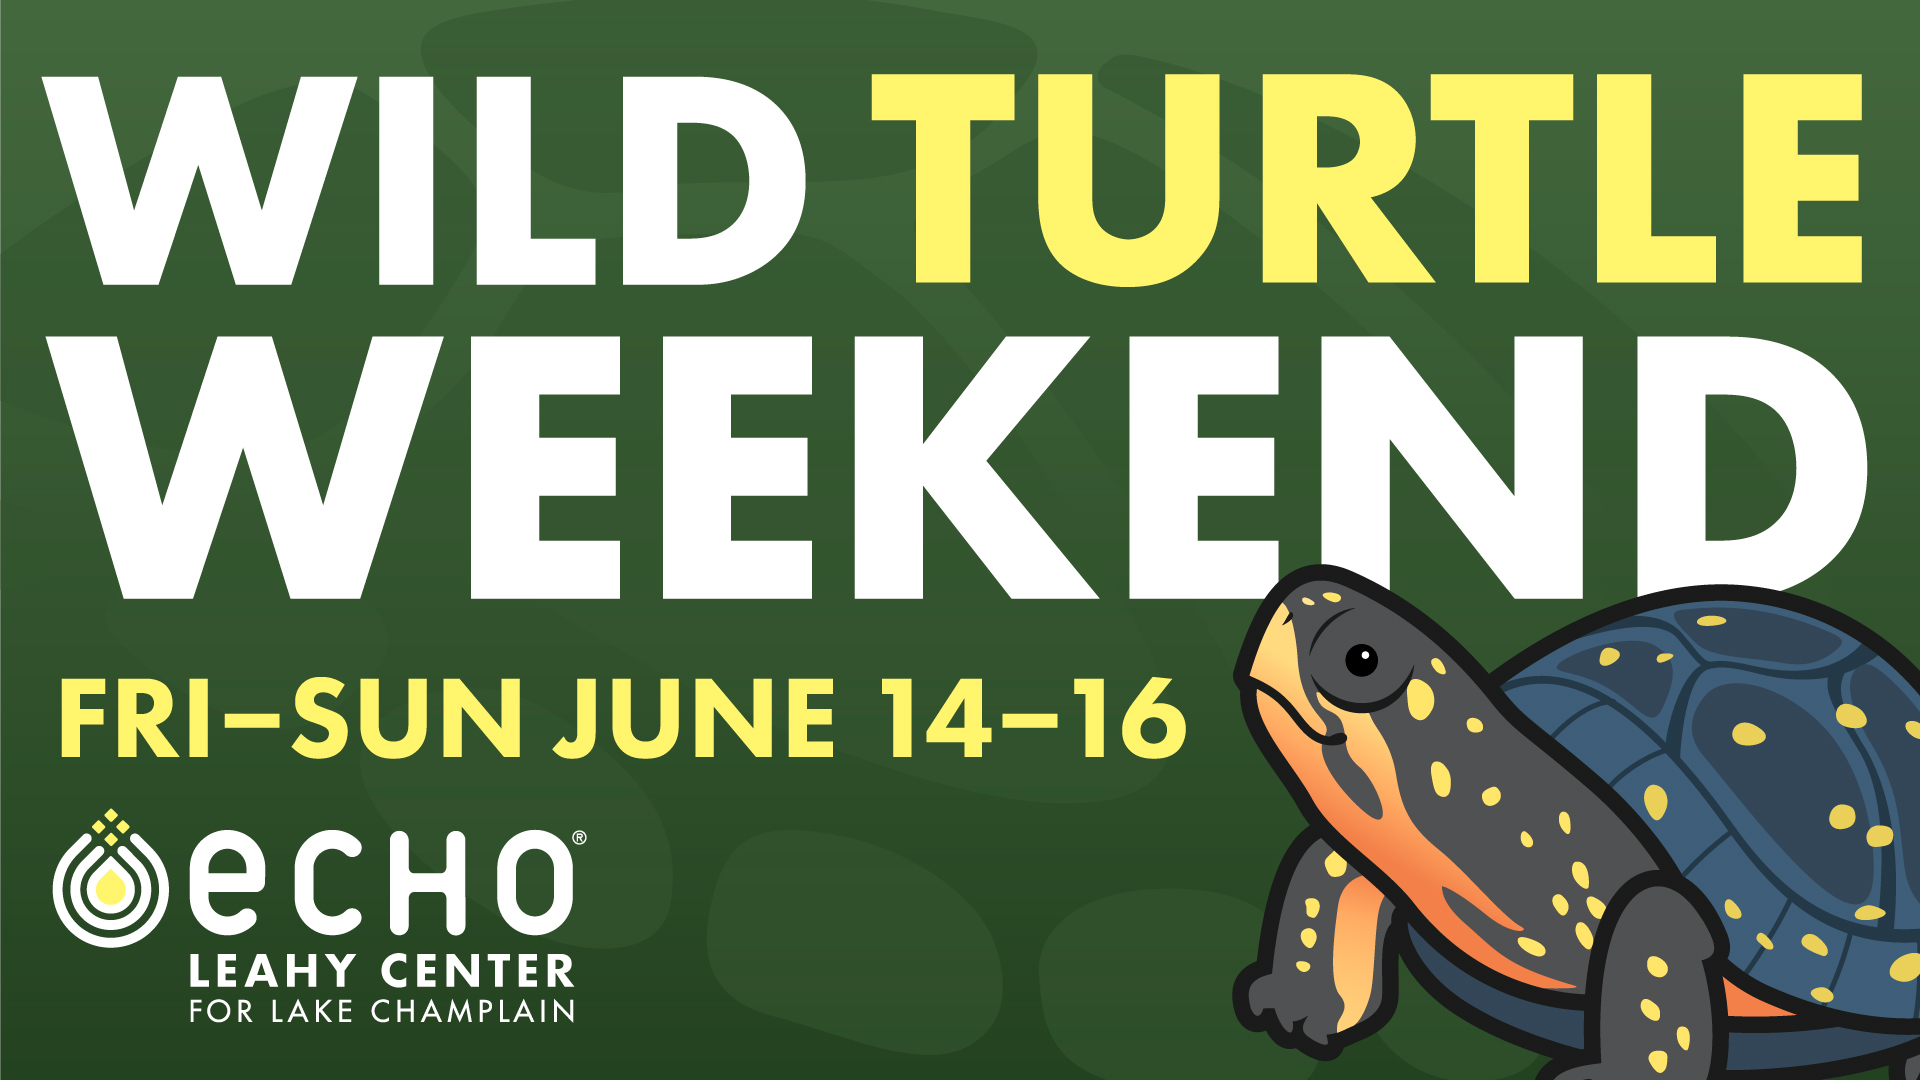 Dark green graphic with illustration of spotted turtle. White and yellow text reads "Wild Turtle Weekend Fri-Sun June 14-16." ECHO Leahy Center logo.